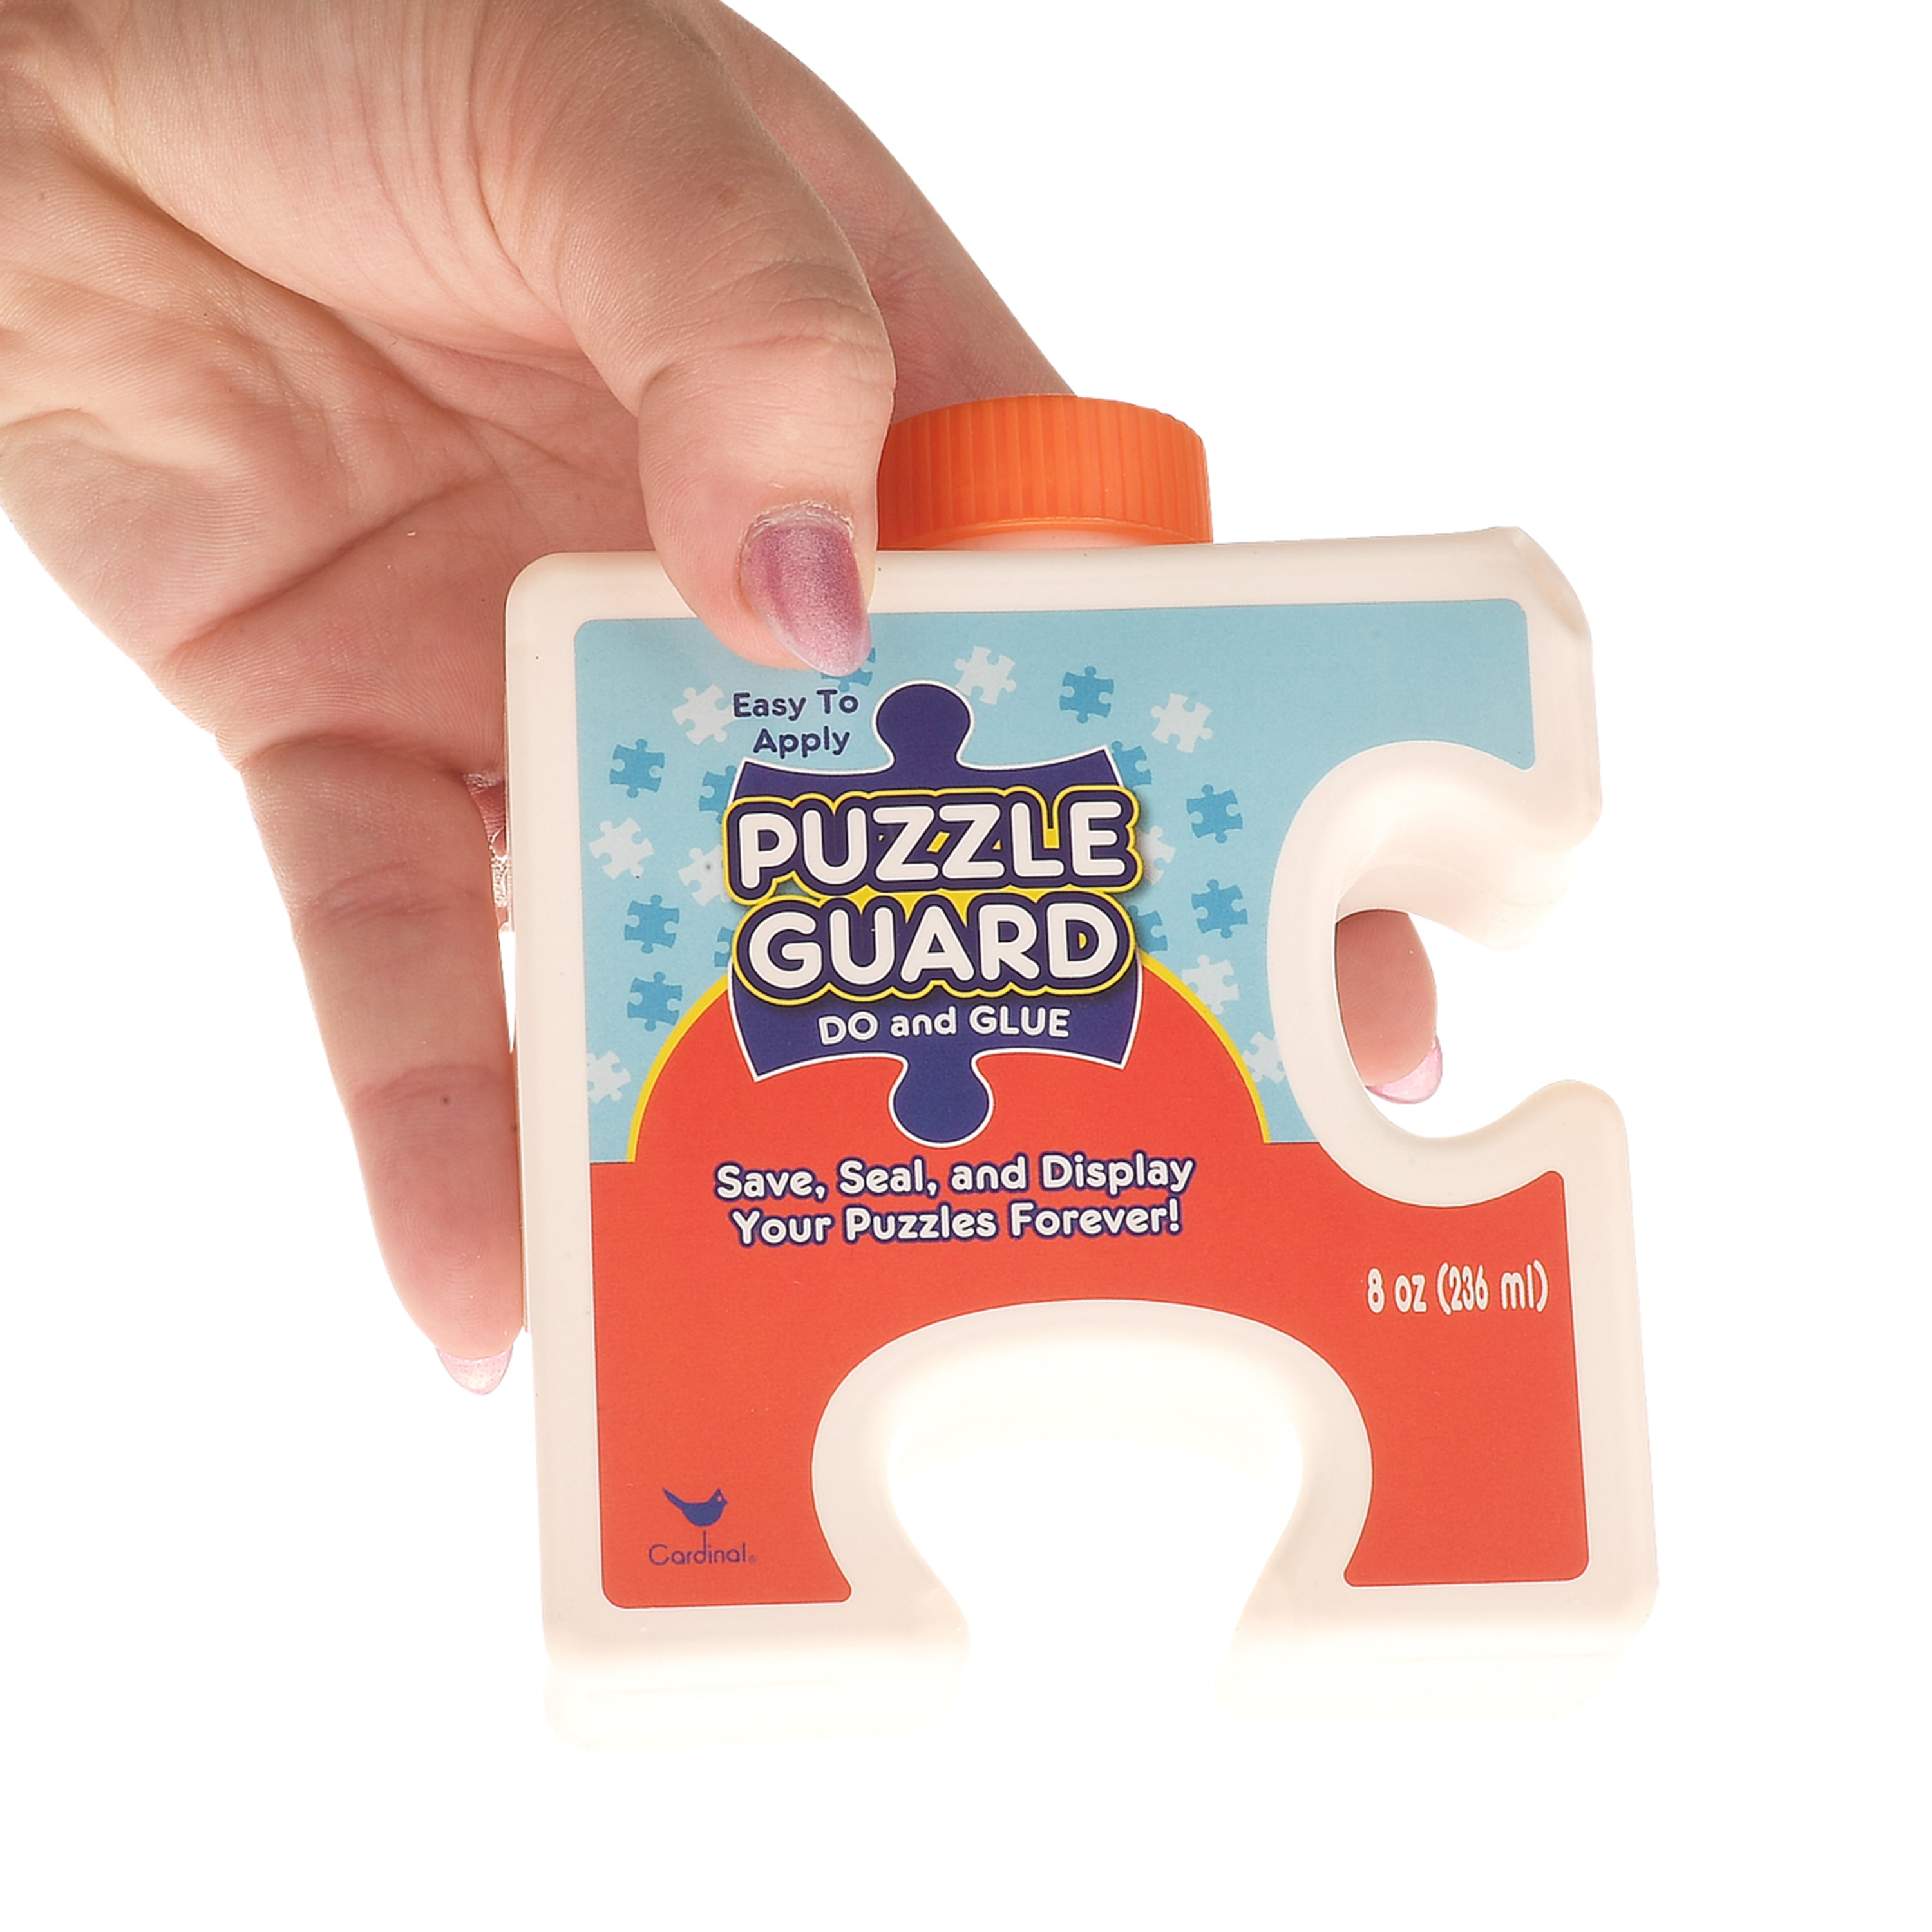 Cardinal Easy to Apply Jigsaw Puzzle Glue Saver Guard 8 oz Save Seal  Display NEW 778988650370